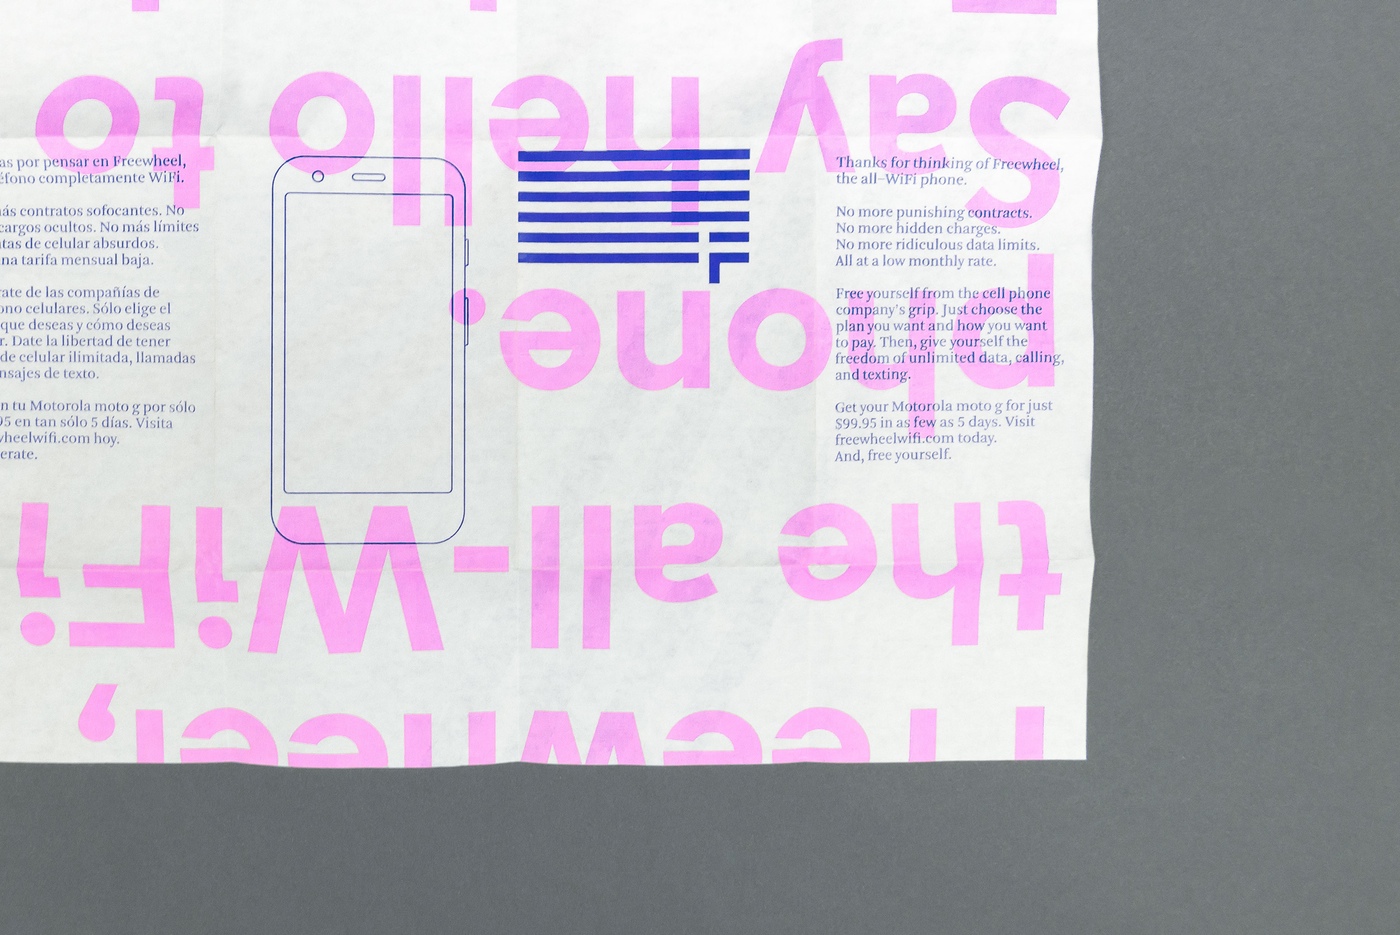 Brand identity and print by New York based graphic design studio Collins for Freewheel, a dedicated wi-fi mobile phone